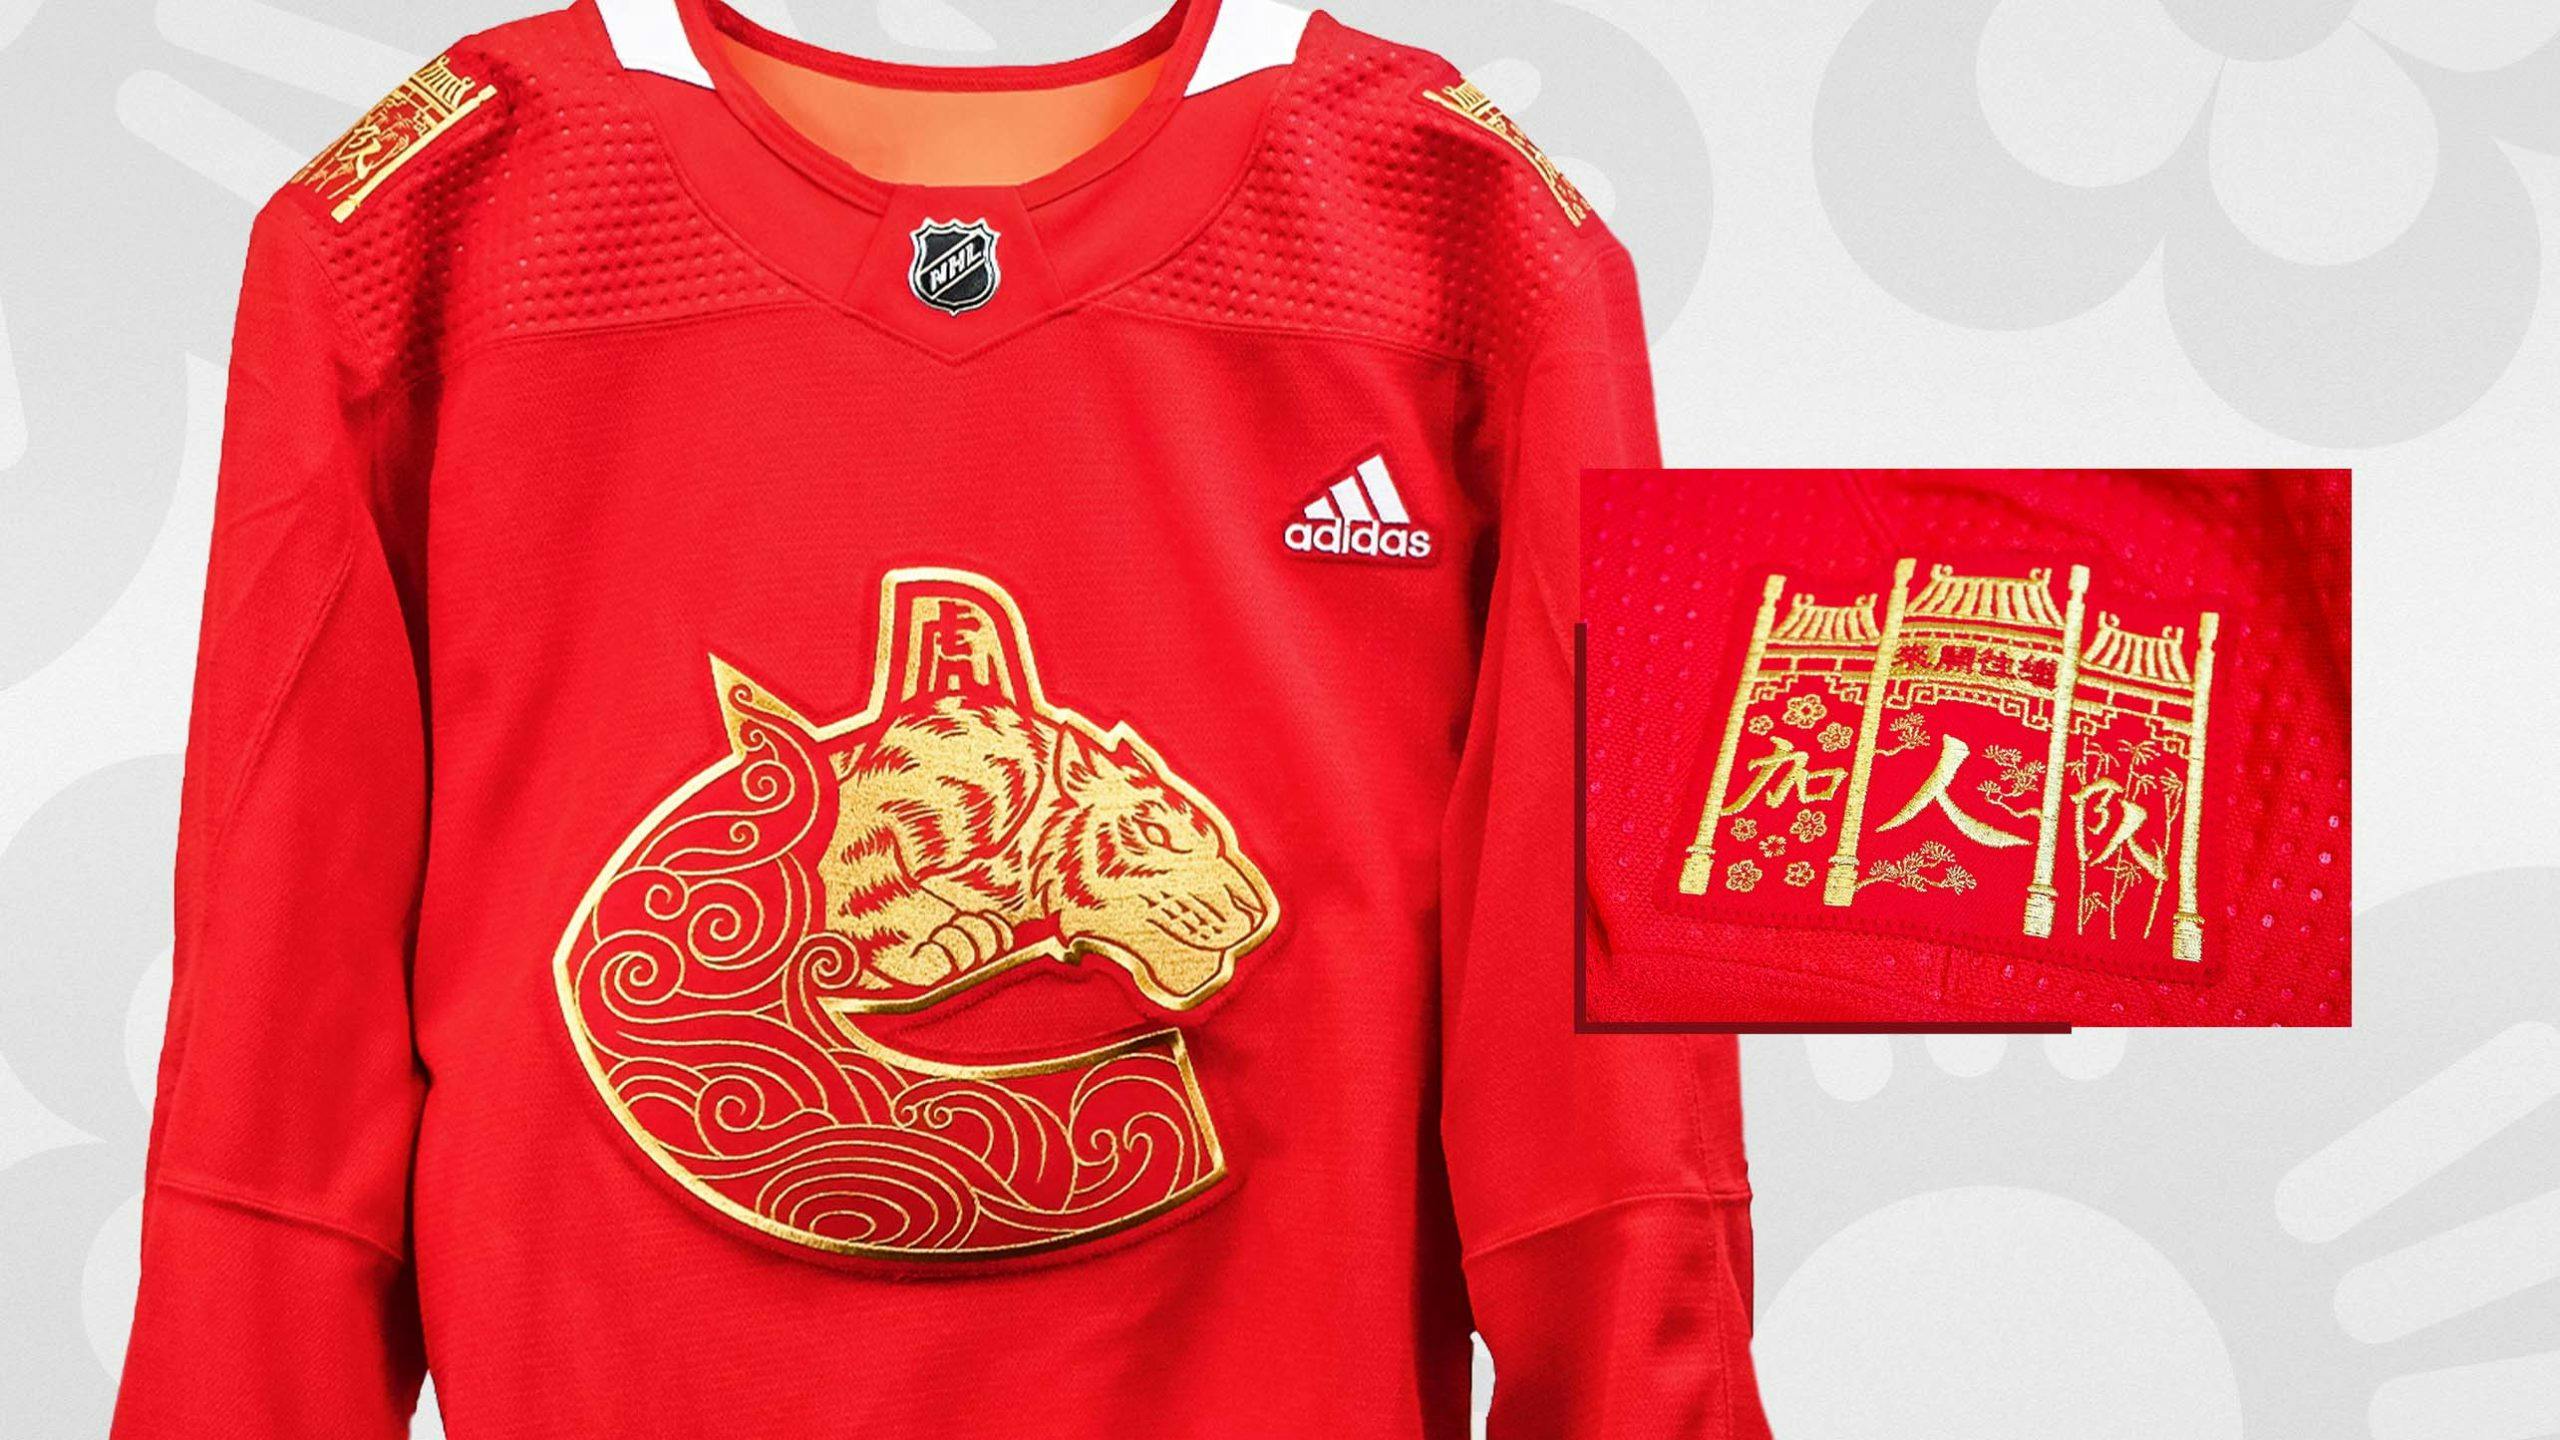 Canucks reveal Lunar New Year jerseys and they're incredible - Article -  Bardown